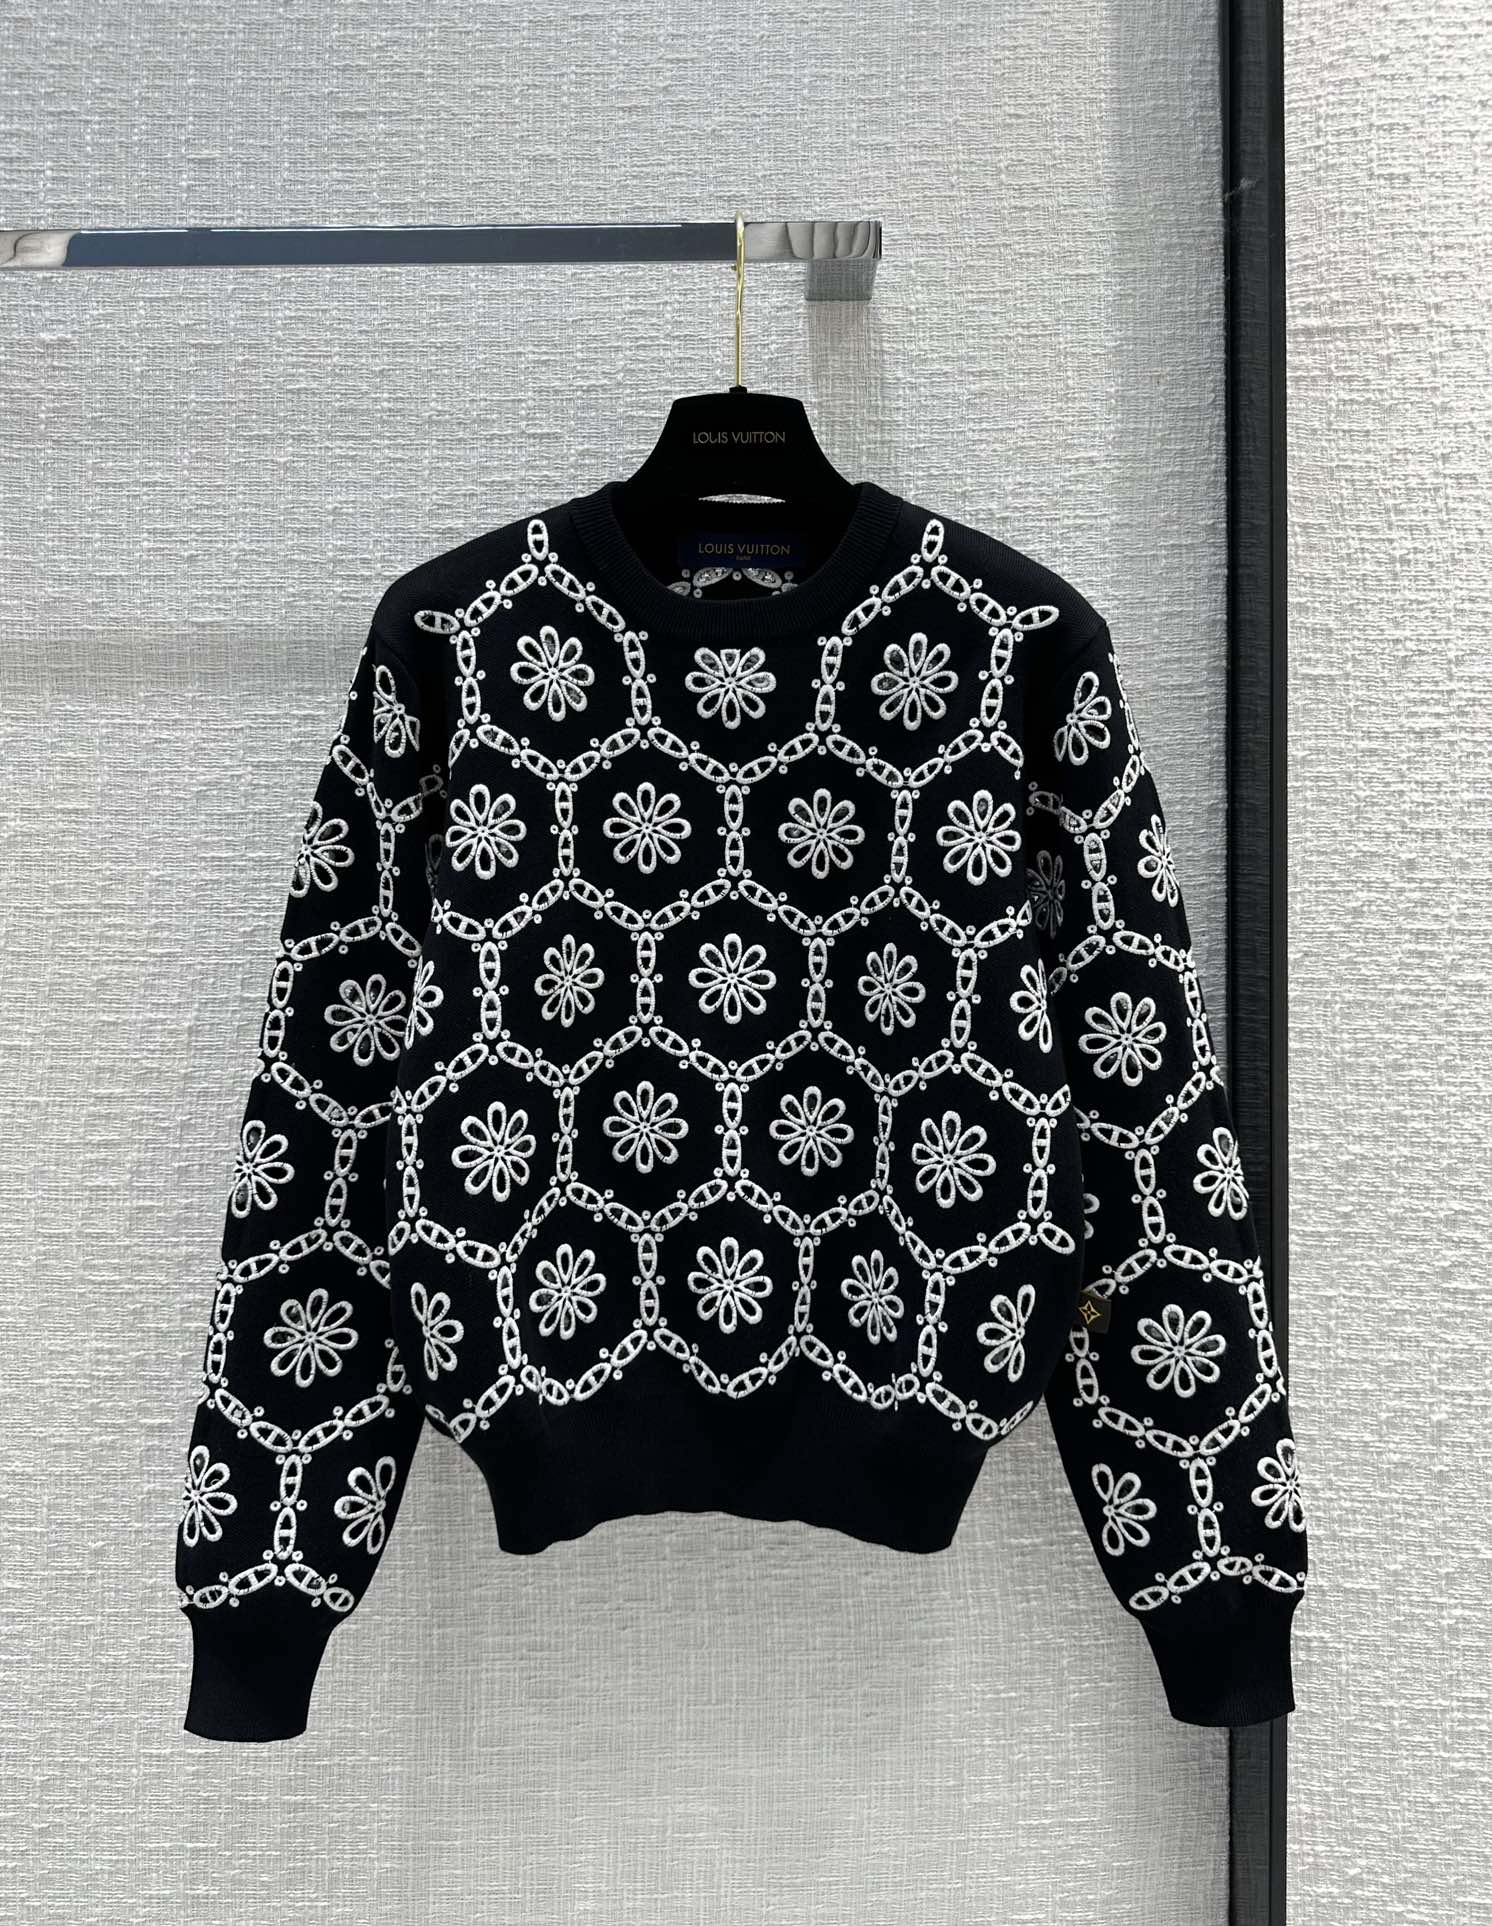 Louis Vuitton Clothing Knit Sweater Black White Embroidery Knitting